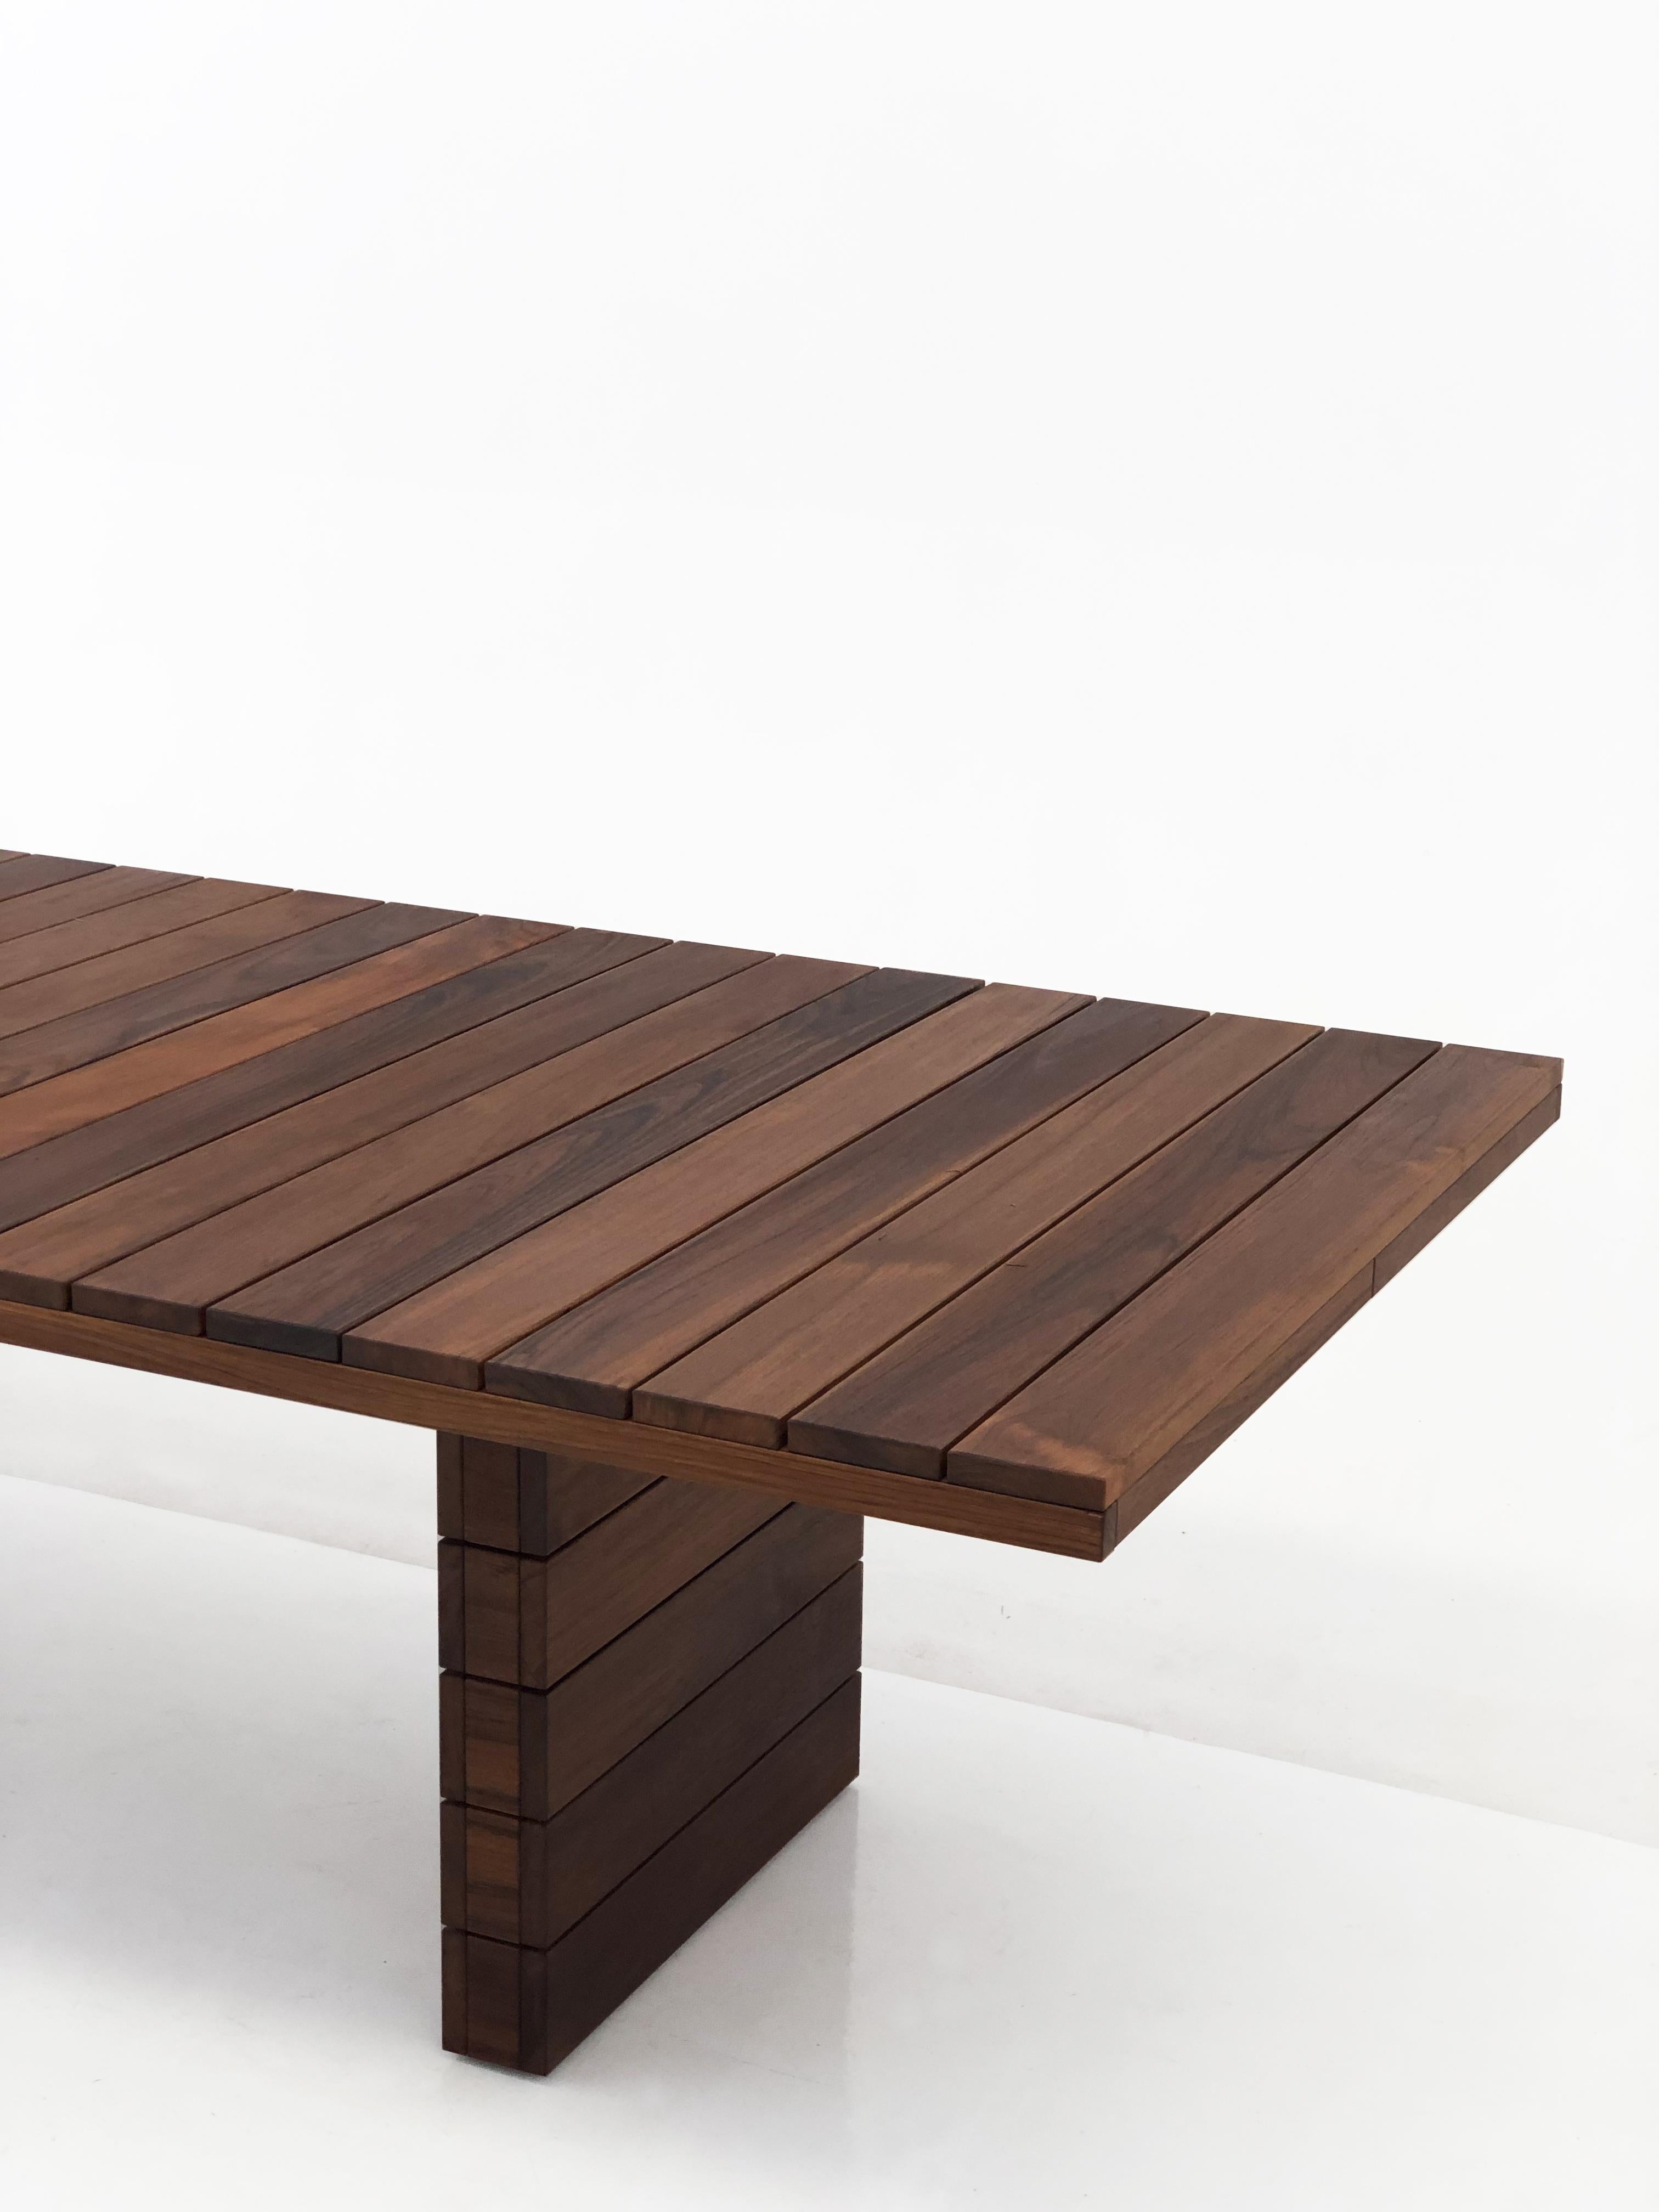 Contemporary Majo, the Simple and Robust Outdoor Table in Teak Wood For Sale